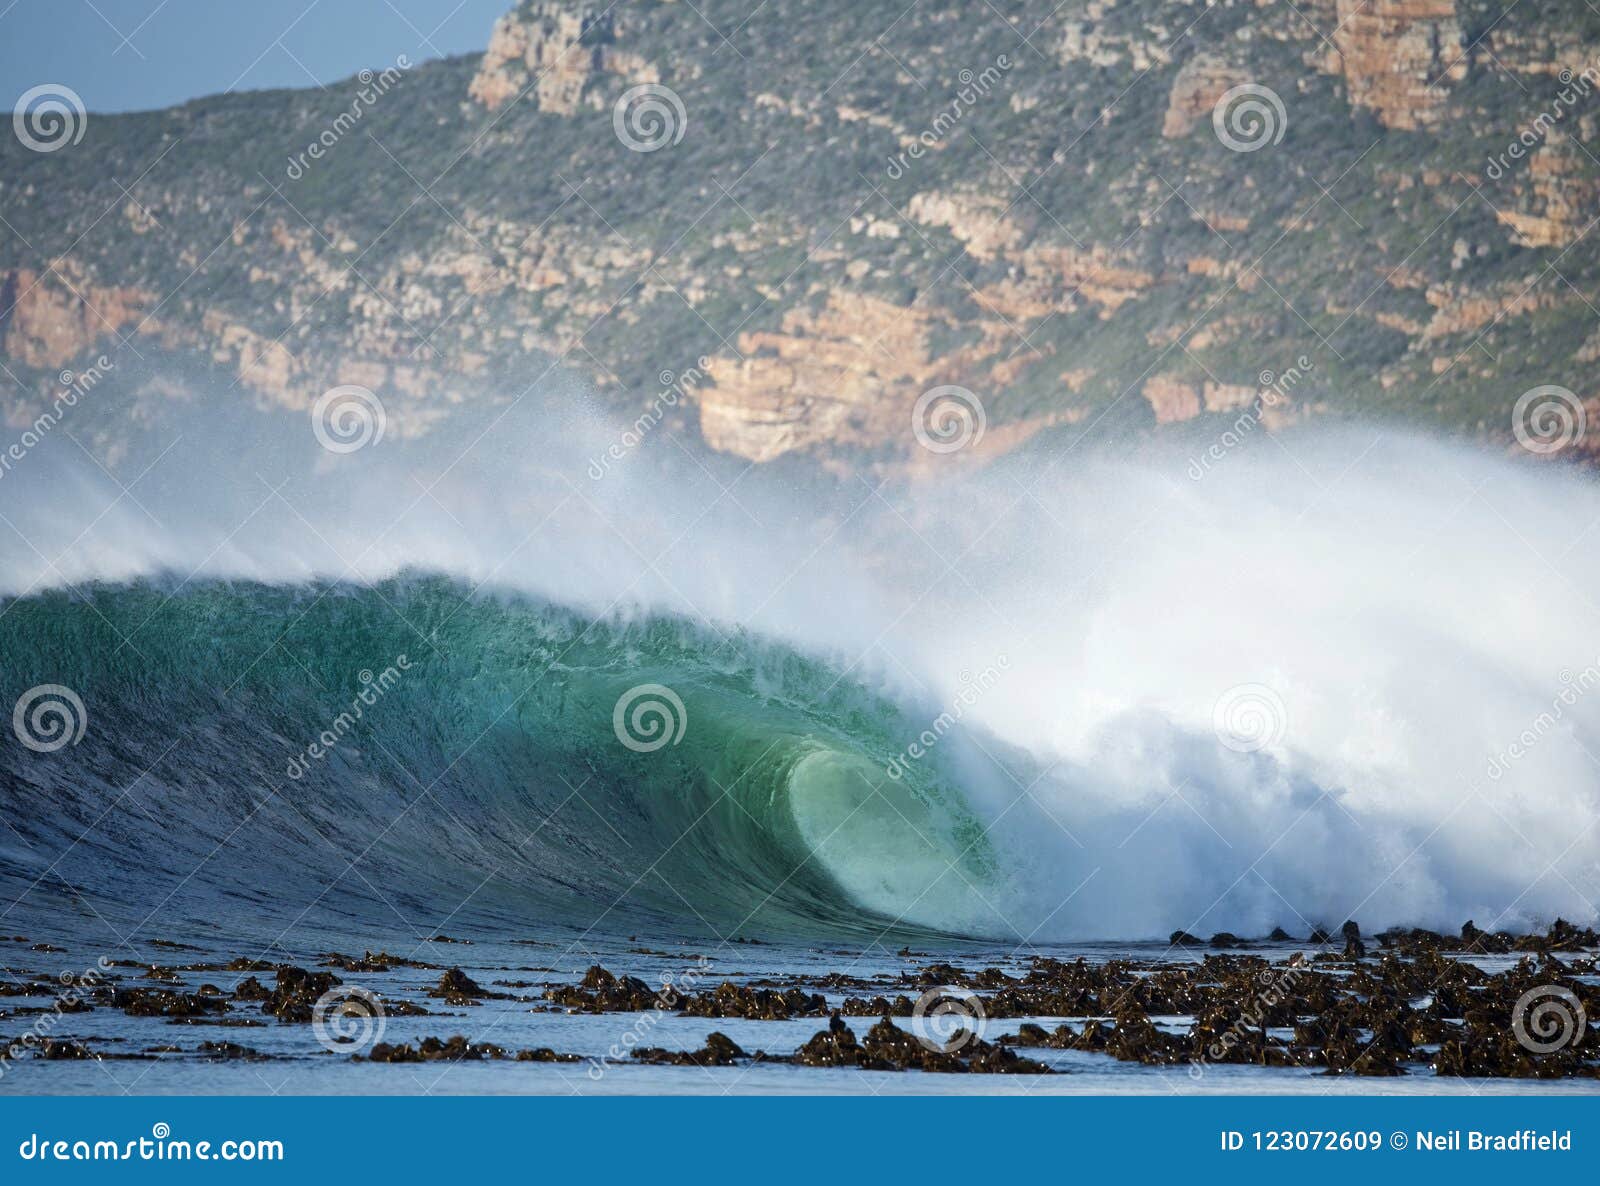 Surfing Wave Cape Town stock image. Image of surfing ...